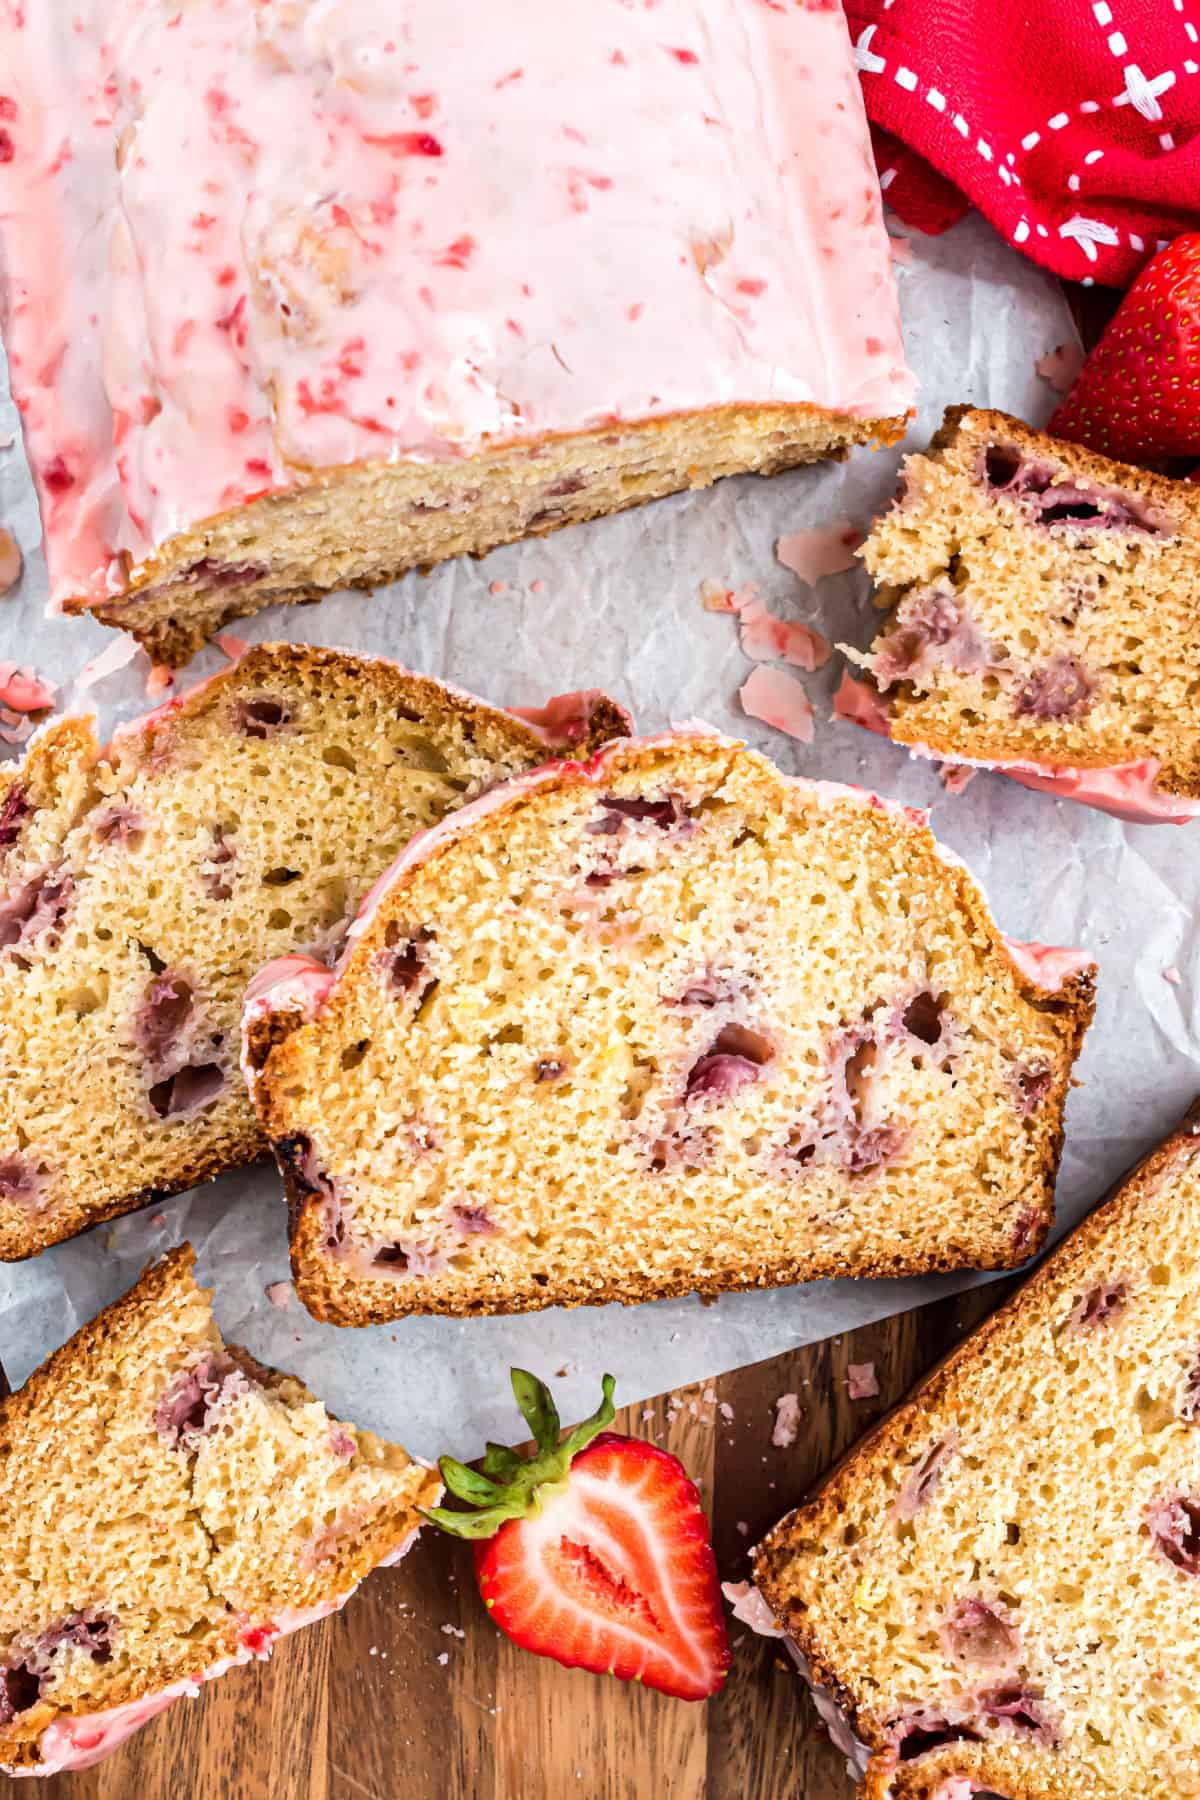 Slices of strawberry bread with strawberry icing.